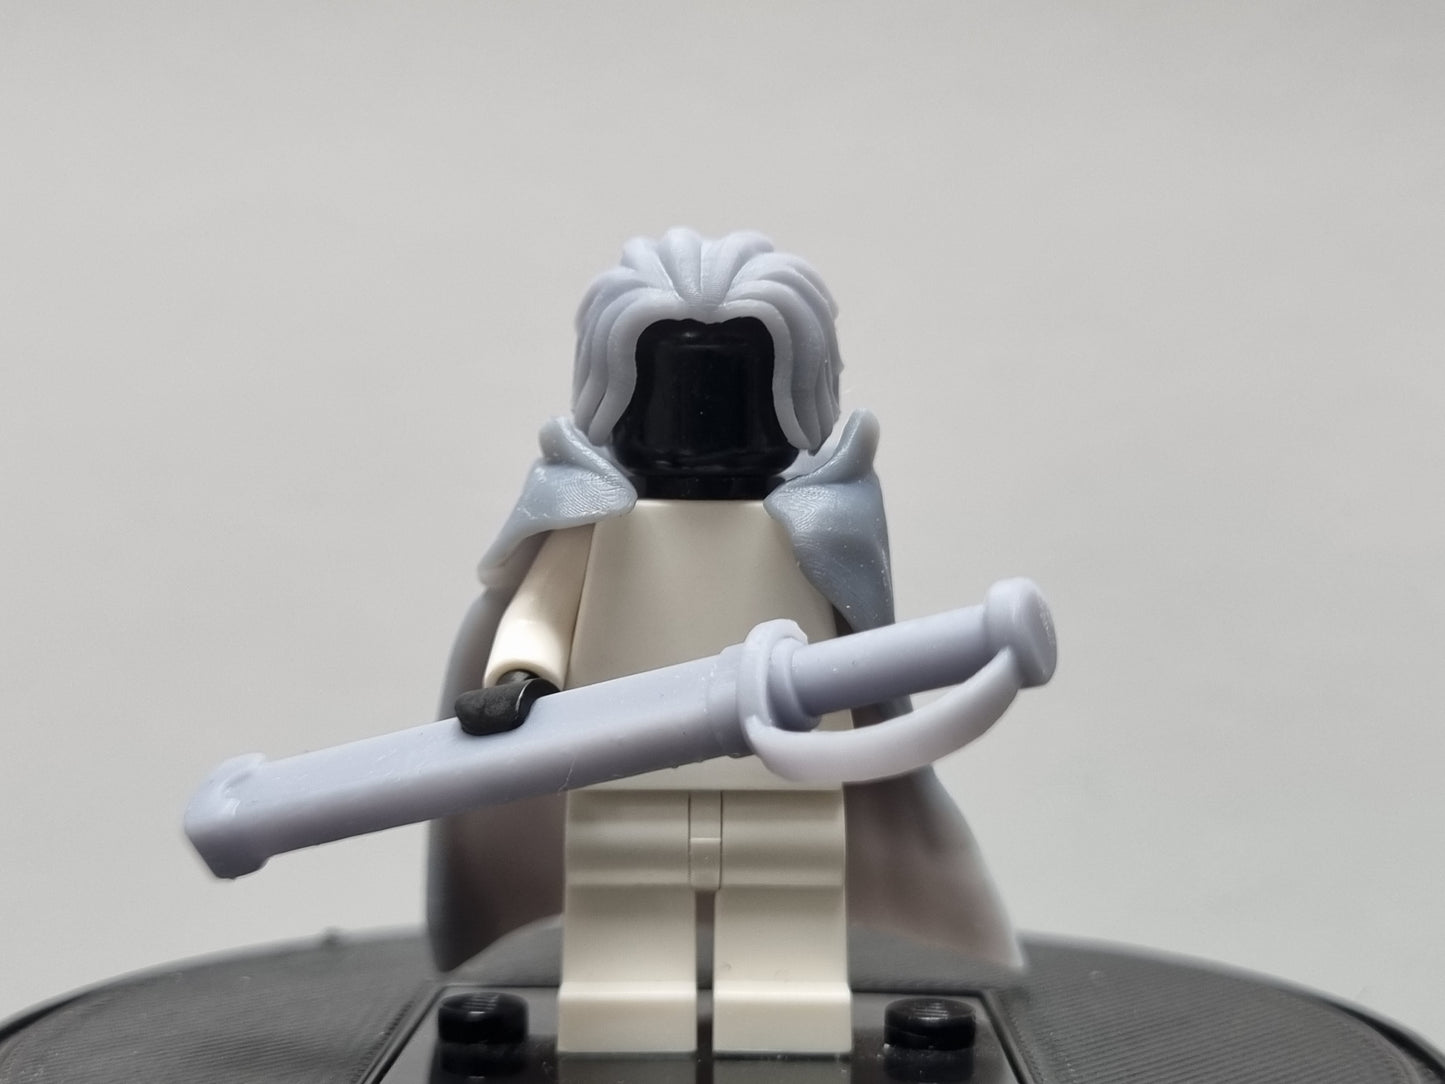 Custom Lego compatible One armed man 3D printed set!